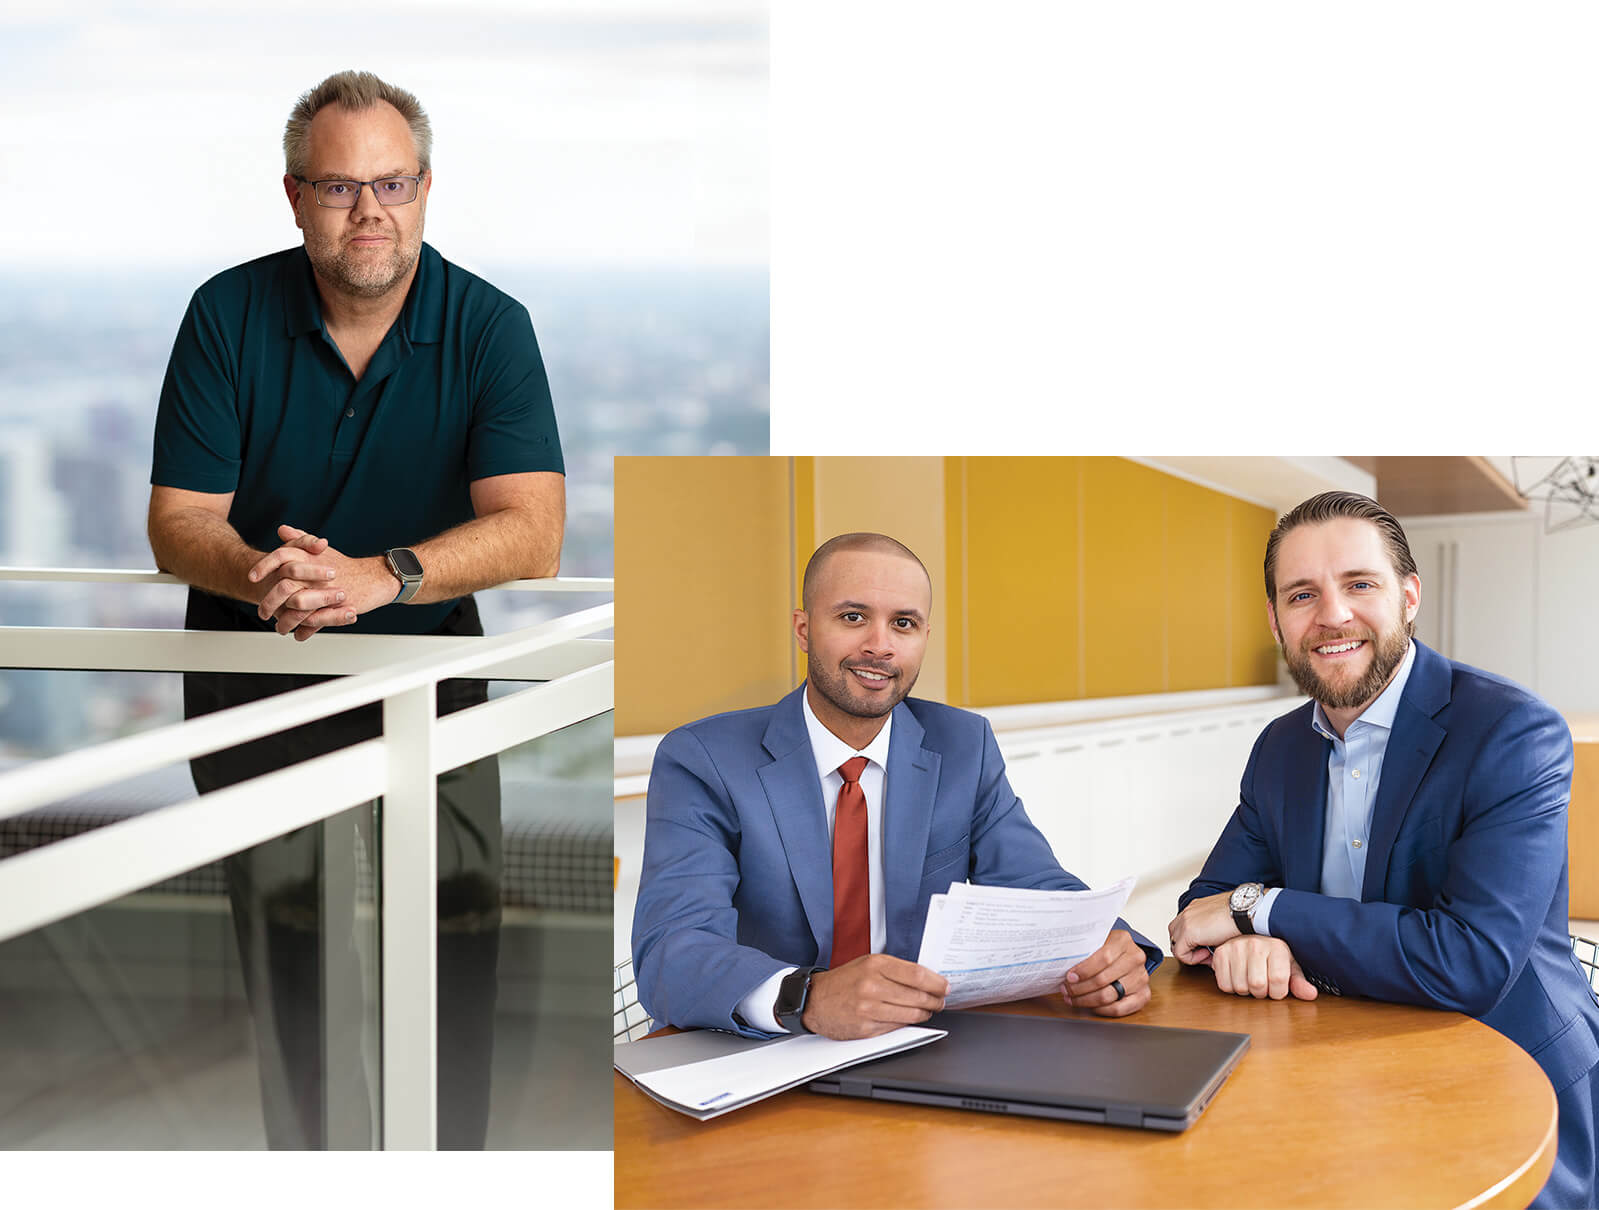 Two photos featuring associates from Baird's Fixed Income Capital Markets group